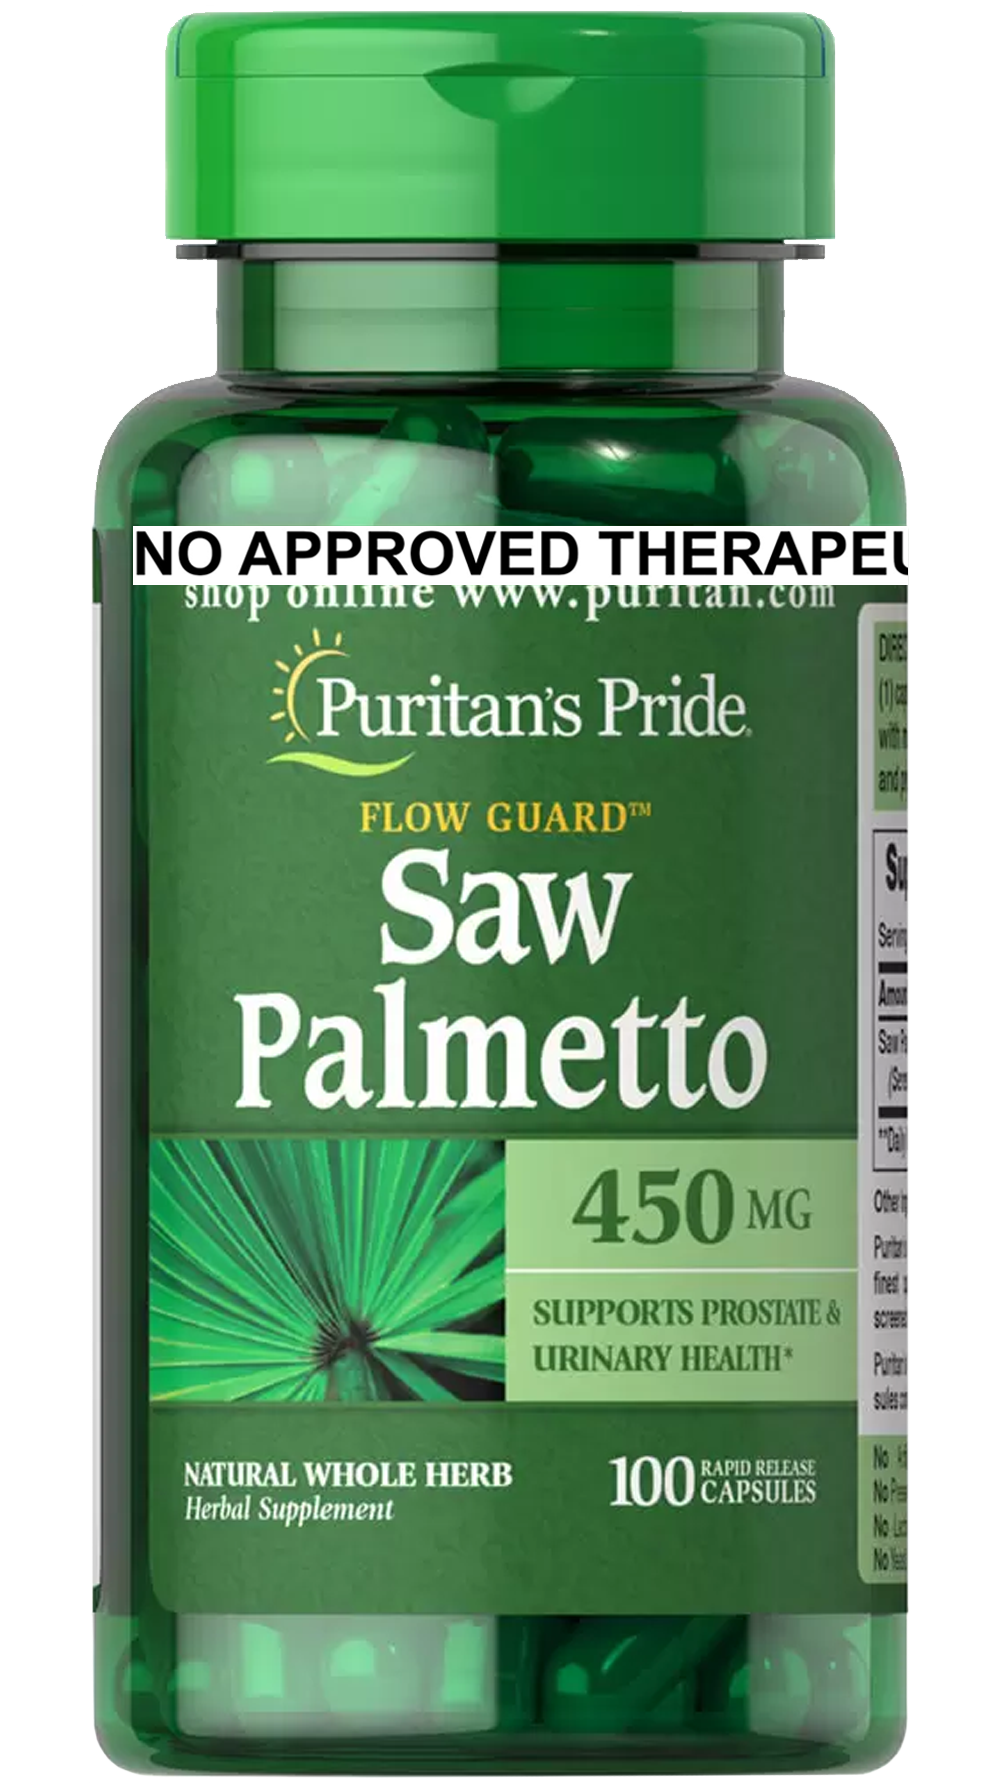 Saw Palmetto 450mg for Prostate Health